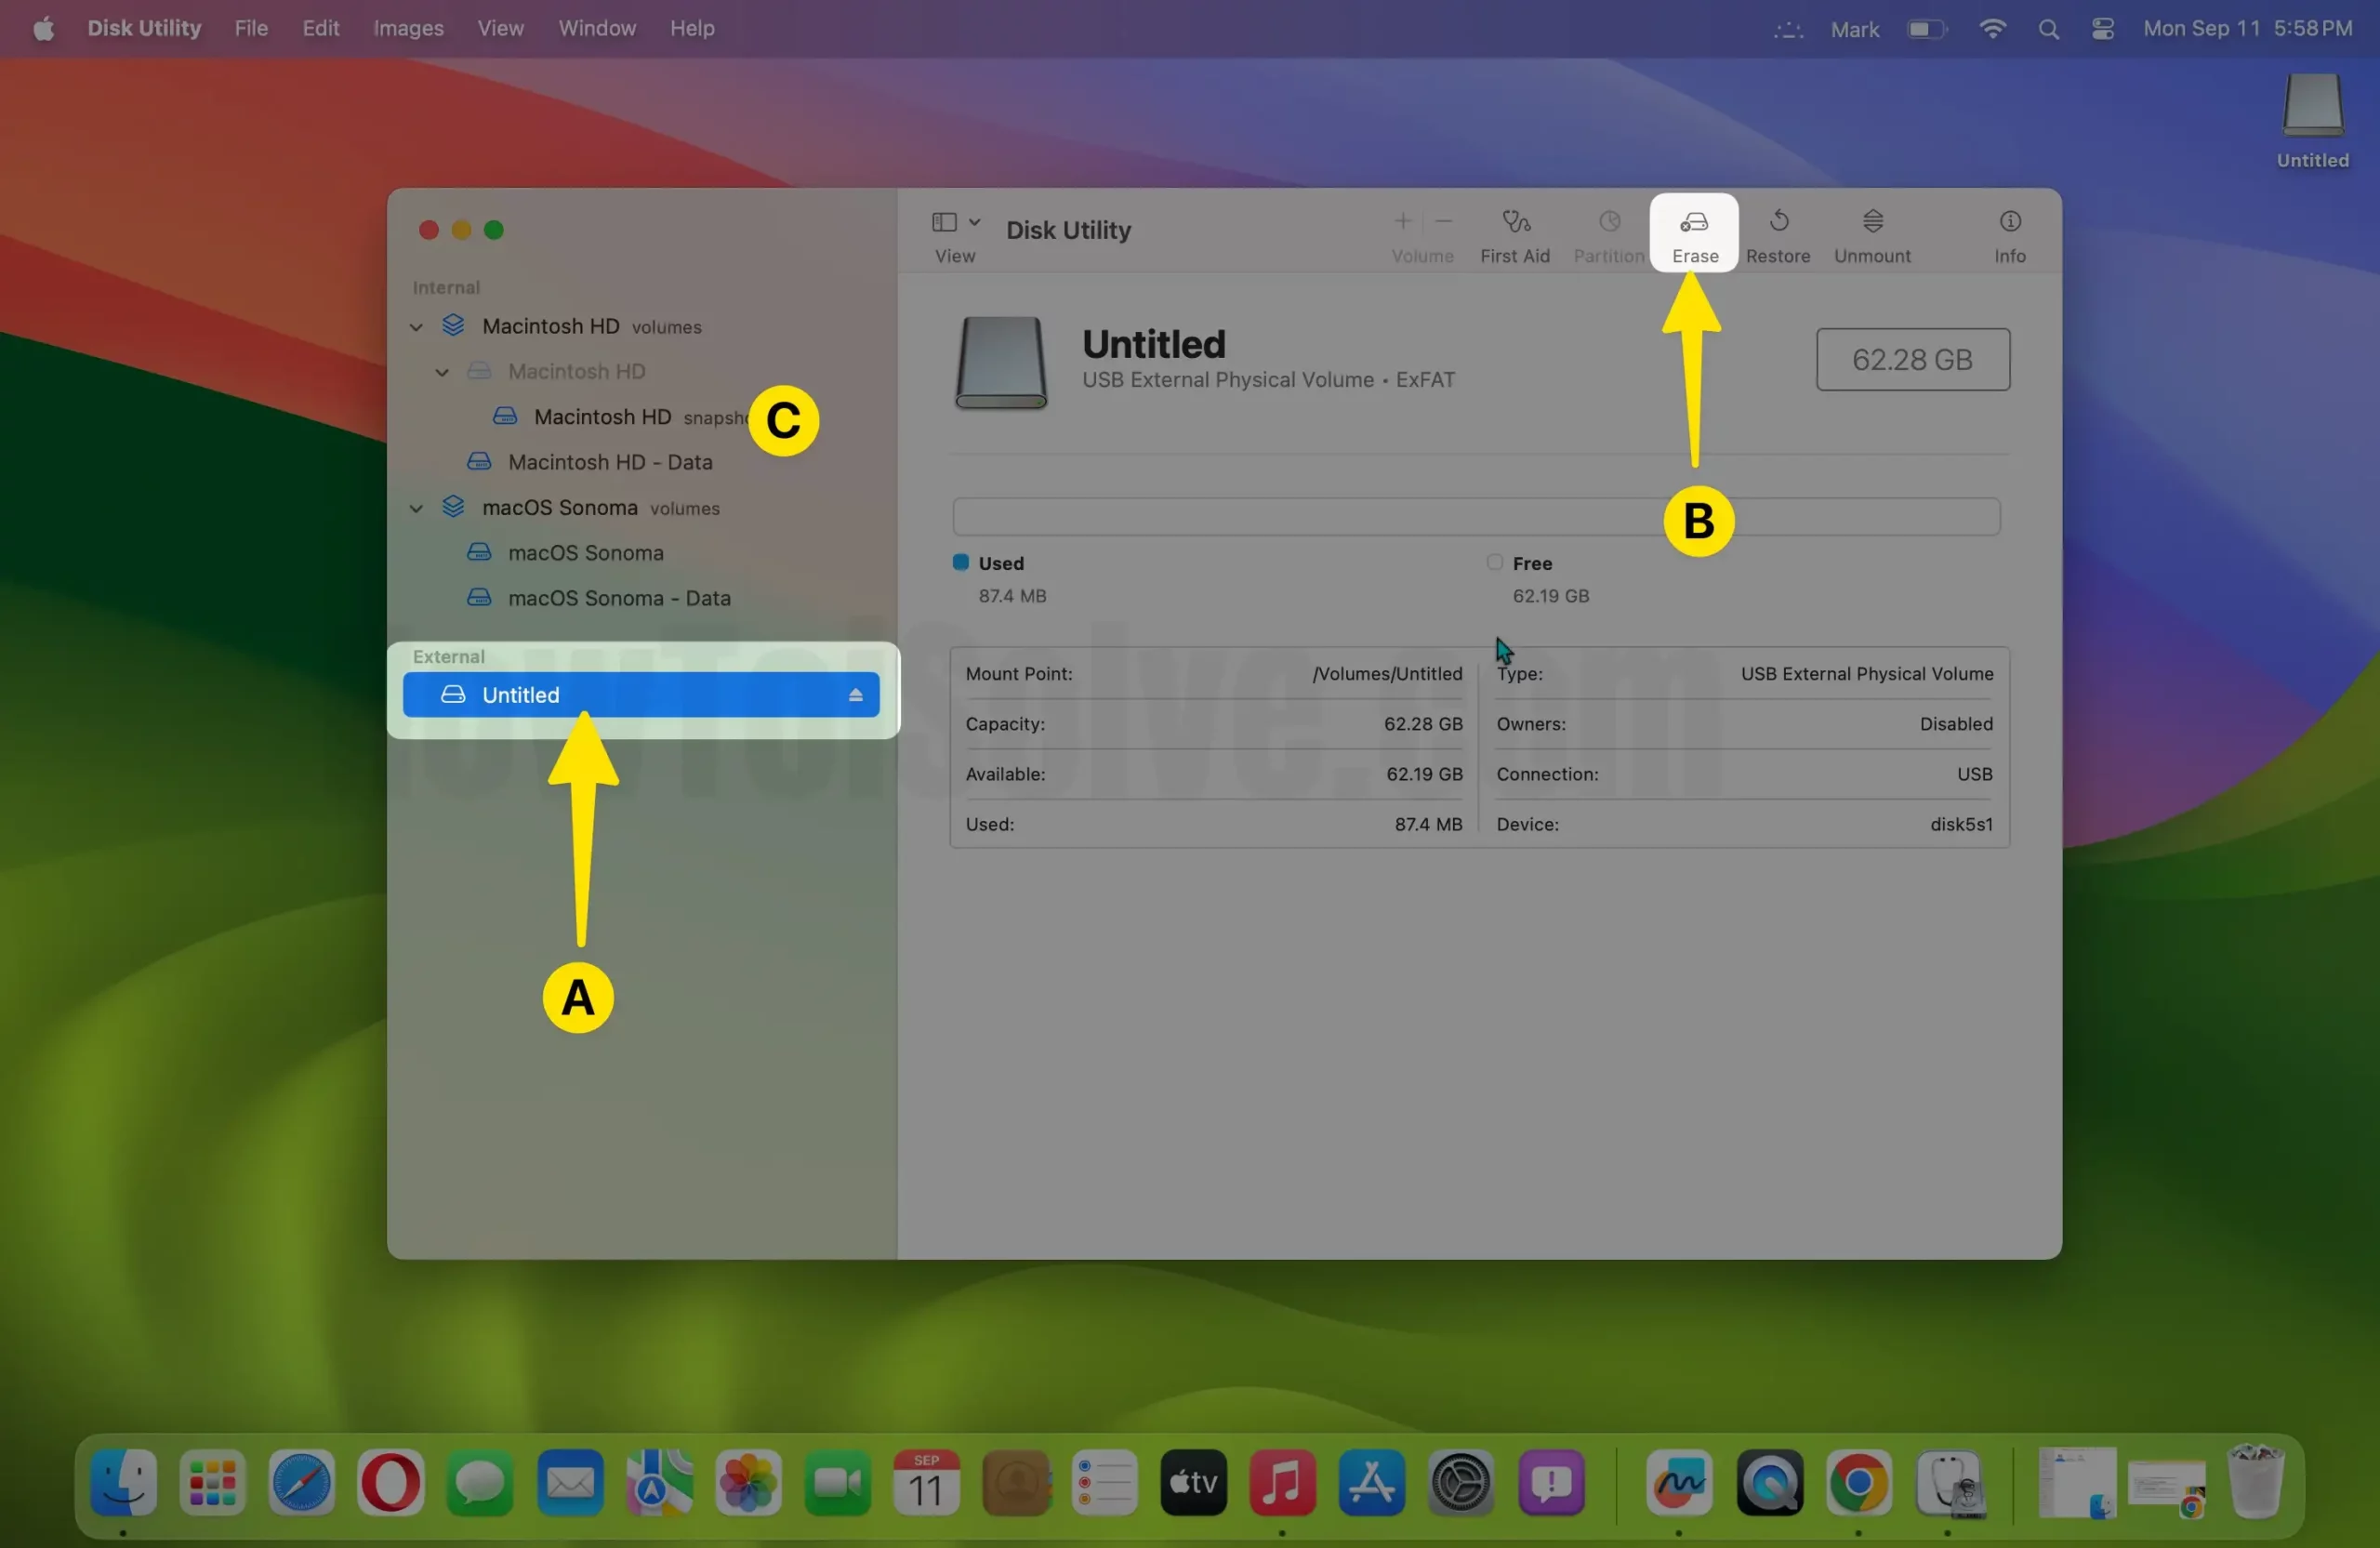 Next, select the external storage device click on the erase on mac